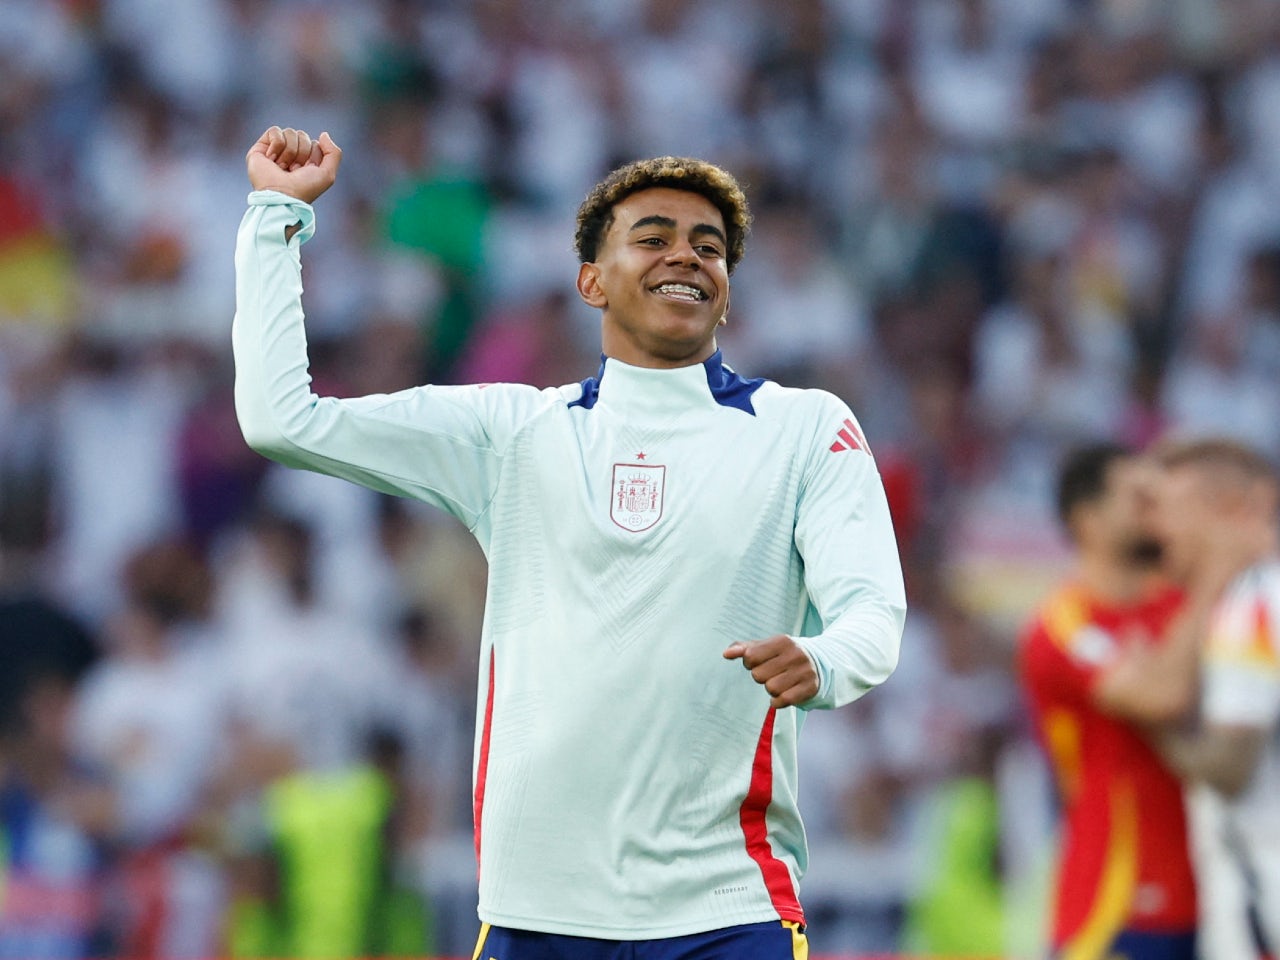 Spain's Lamine Yamal breaks another record in Euro 2024 quarter-final